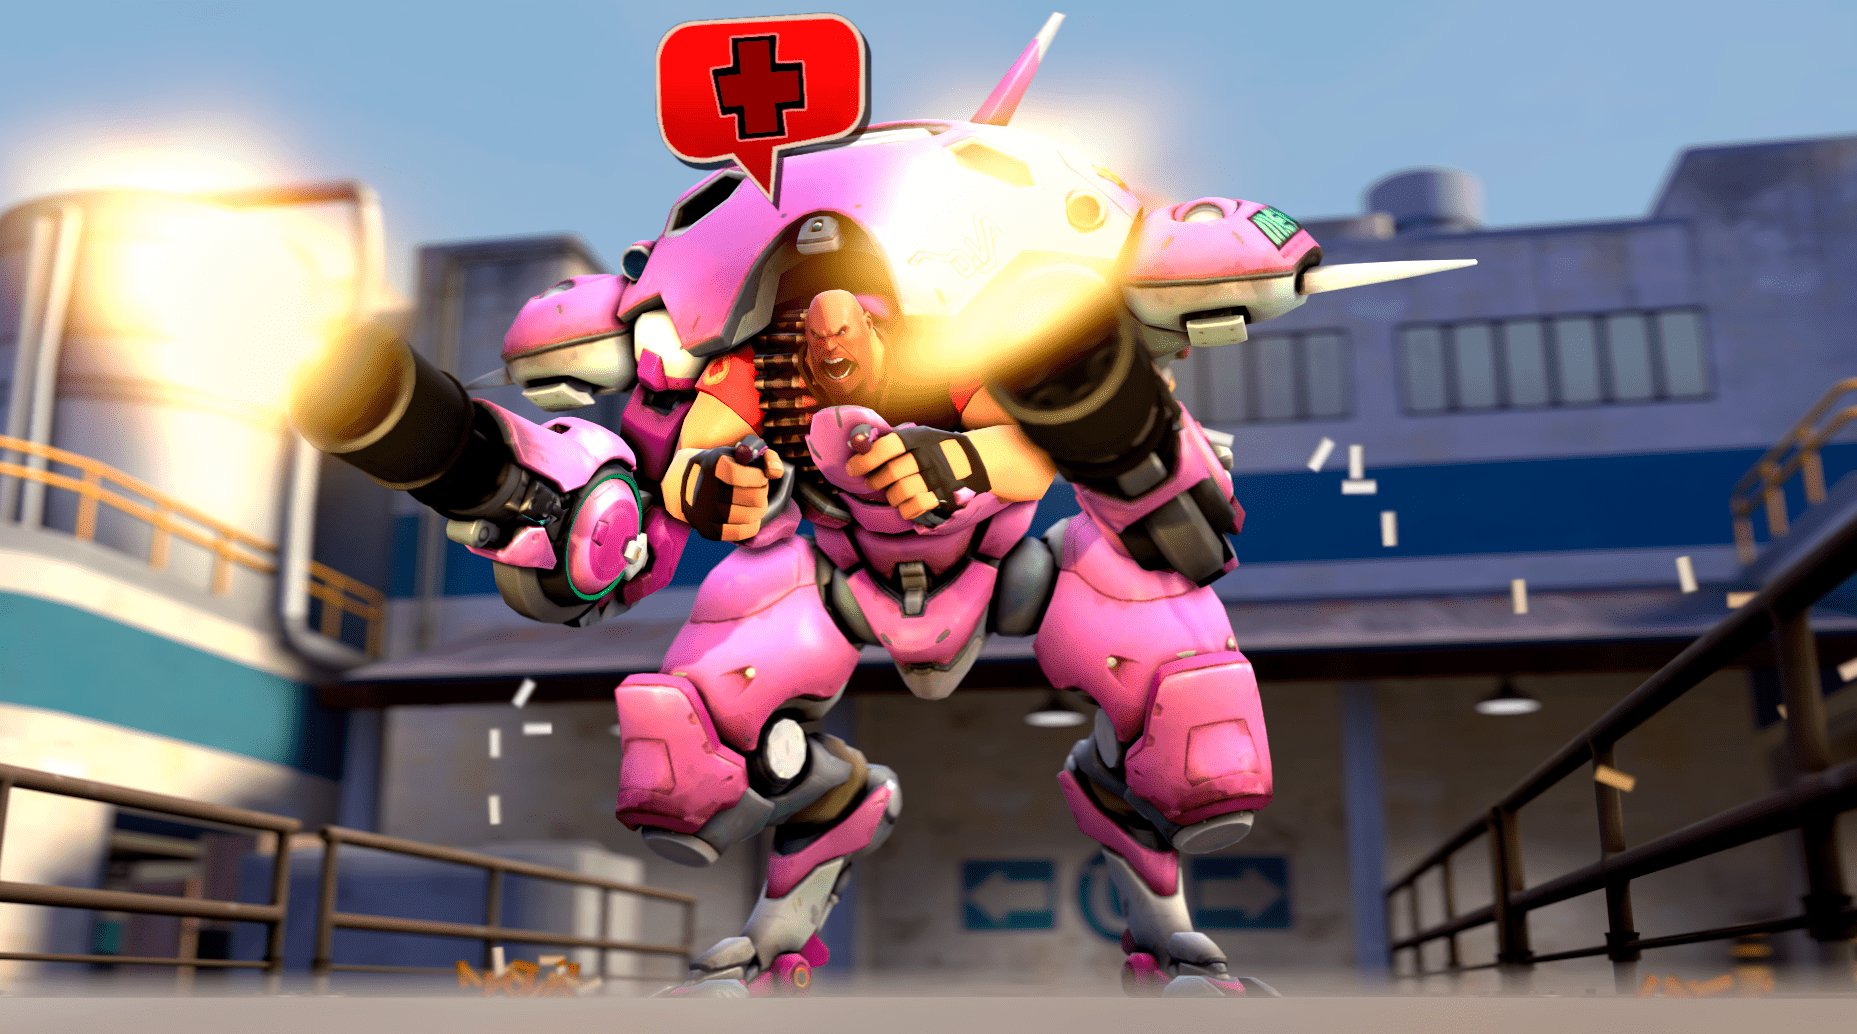 Heavy gets into the Overwatch mood